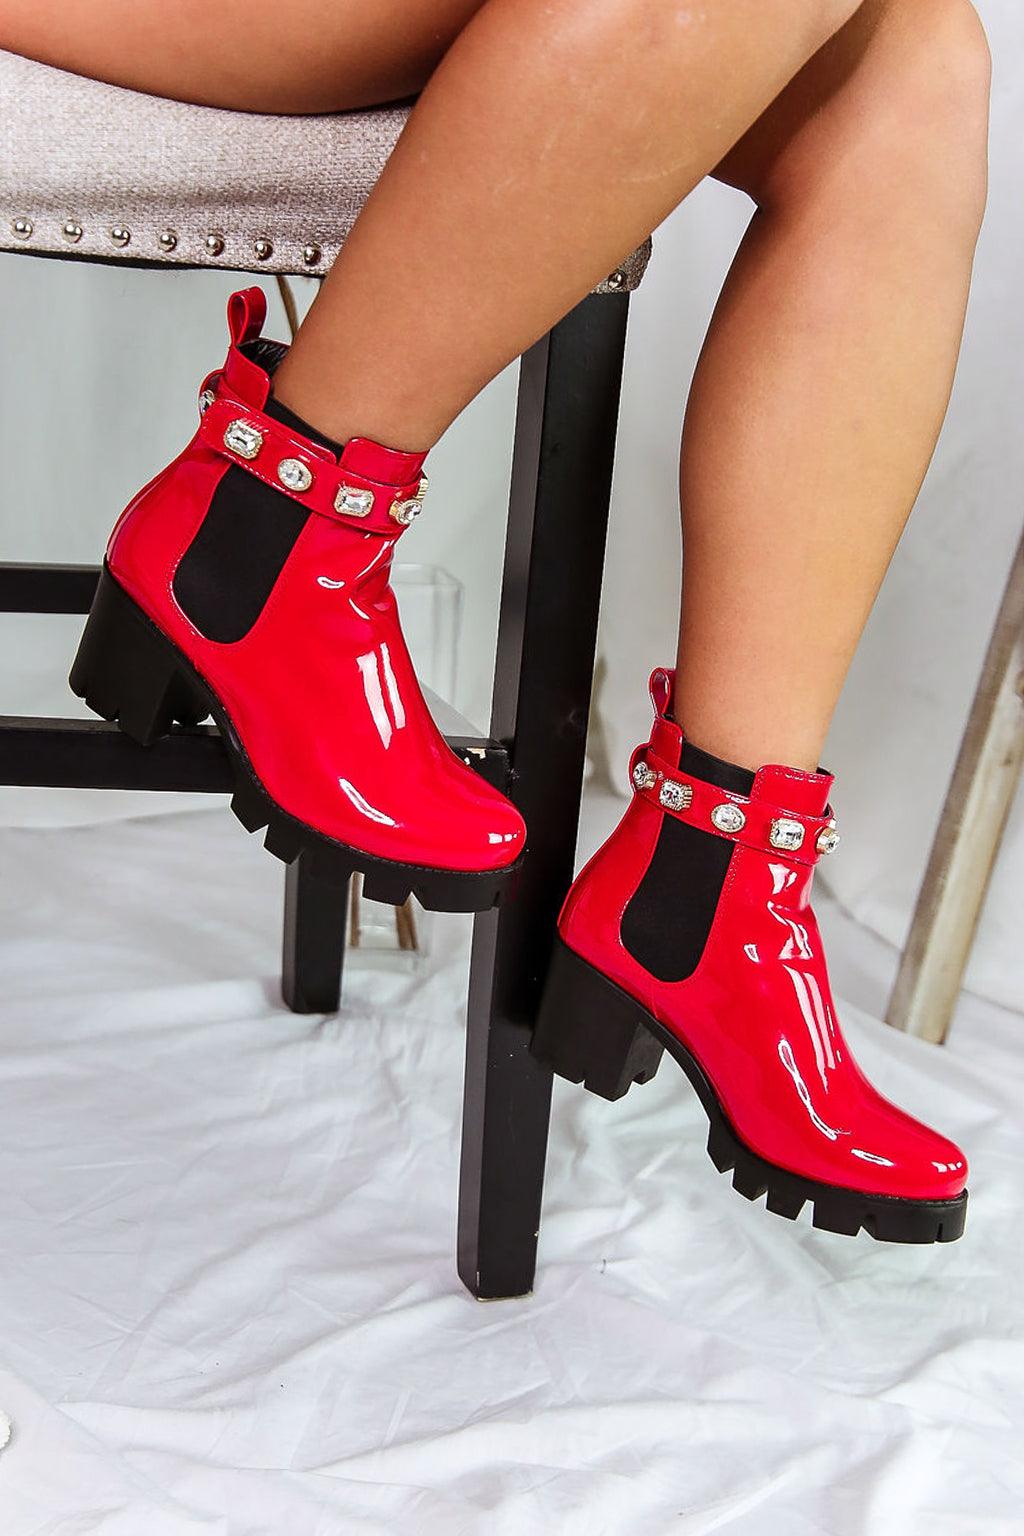 These ankle booties have a treaded sole, chunky heel, elastic side panels, and faux leather strap adorned with jewels.